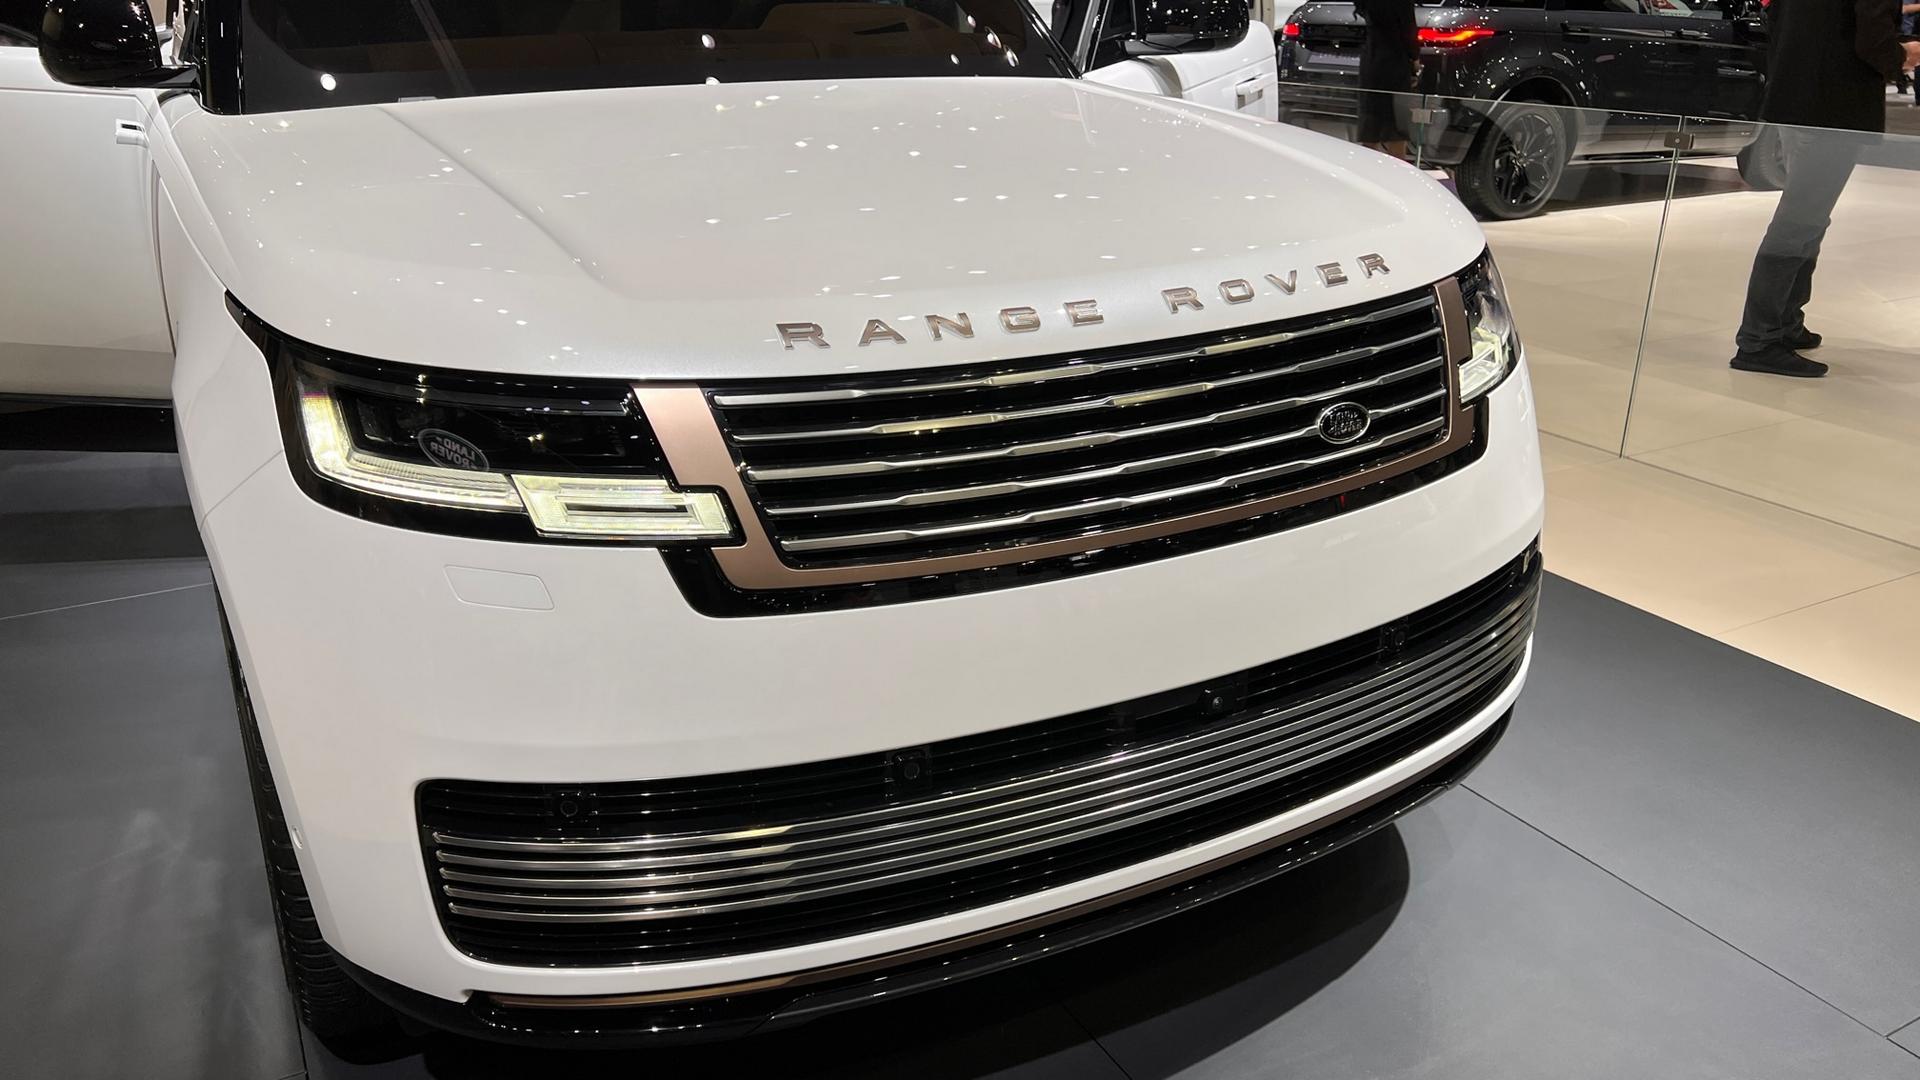 New Range Rover grille